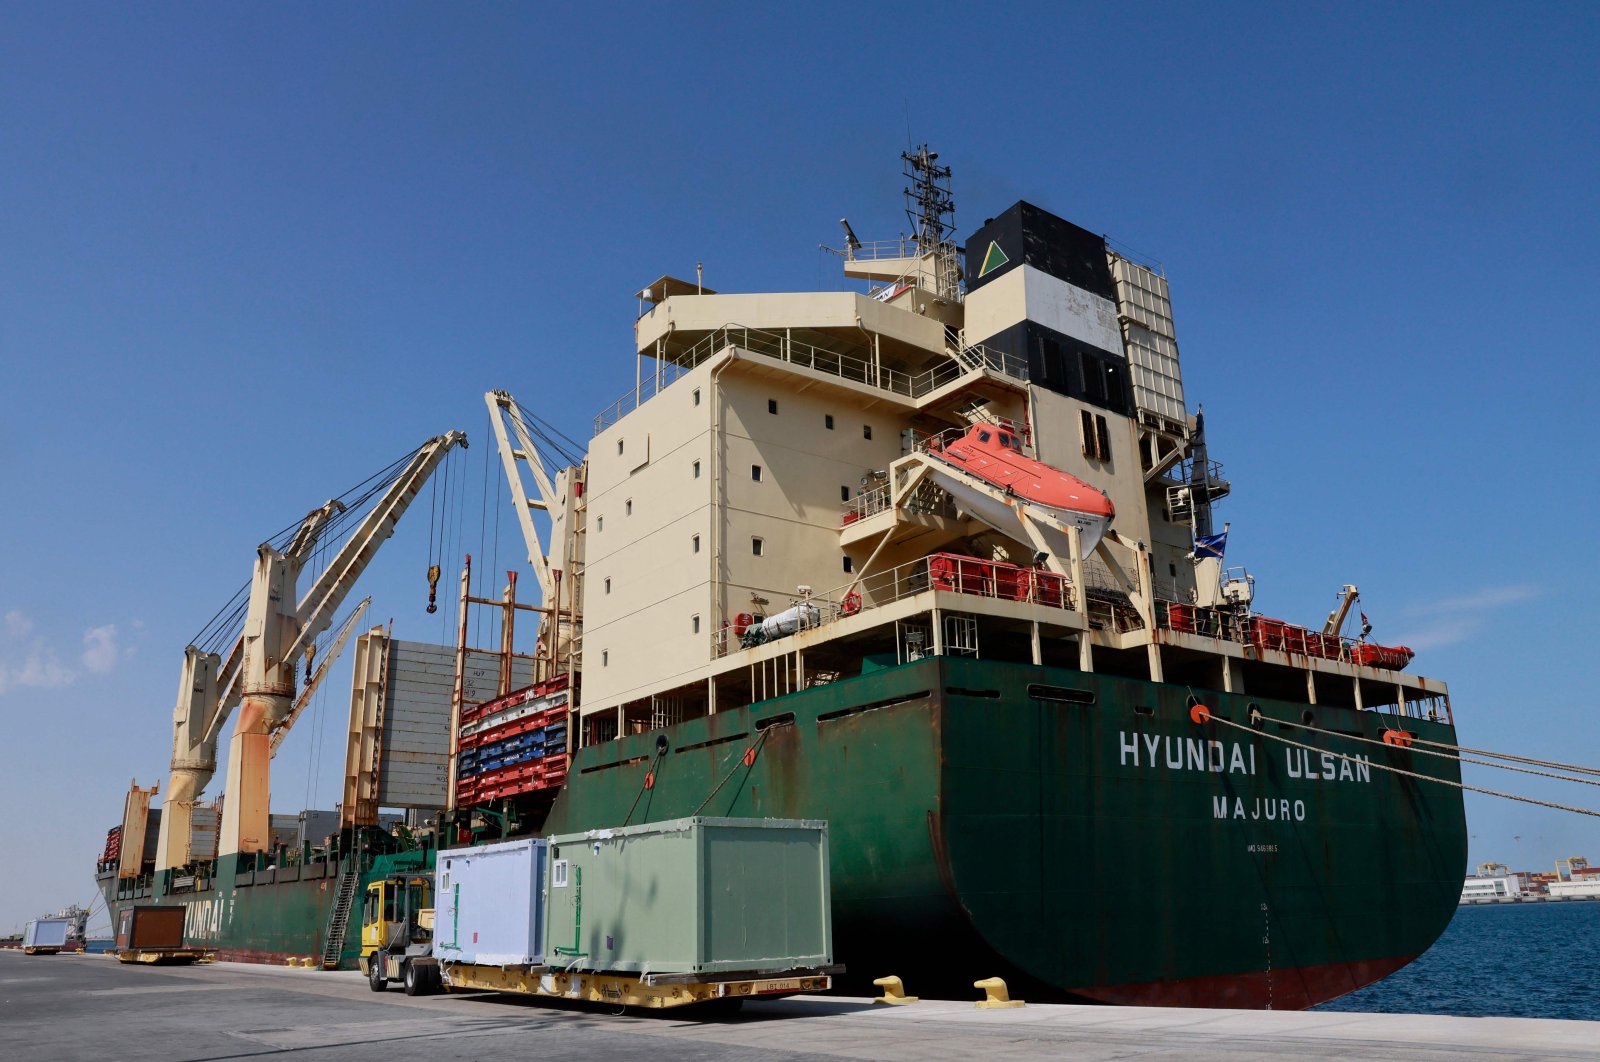 Workers load cabins and caravans used during the football World Cup in Qatar onto a Türkiye and Syria-bound cargo ship slated for departure from Hamad Port, Doha, Qatar, March 20, 2023. (AFP Photo)